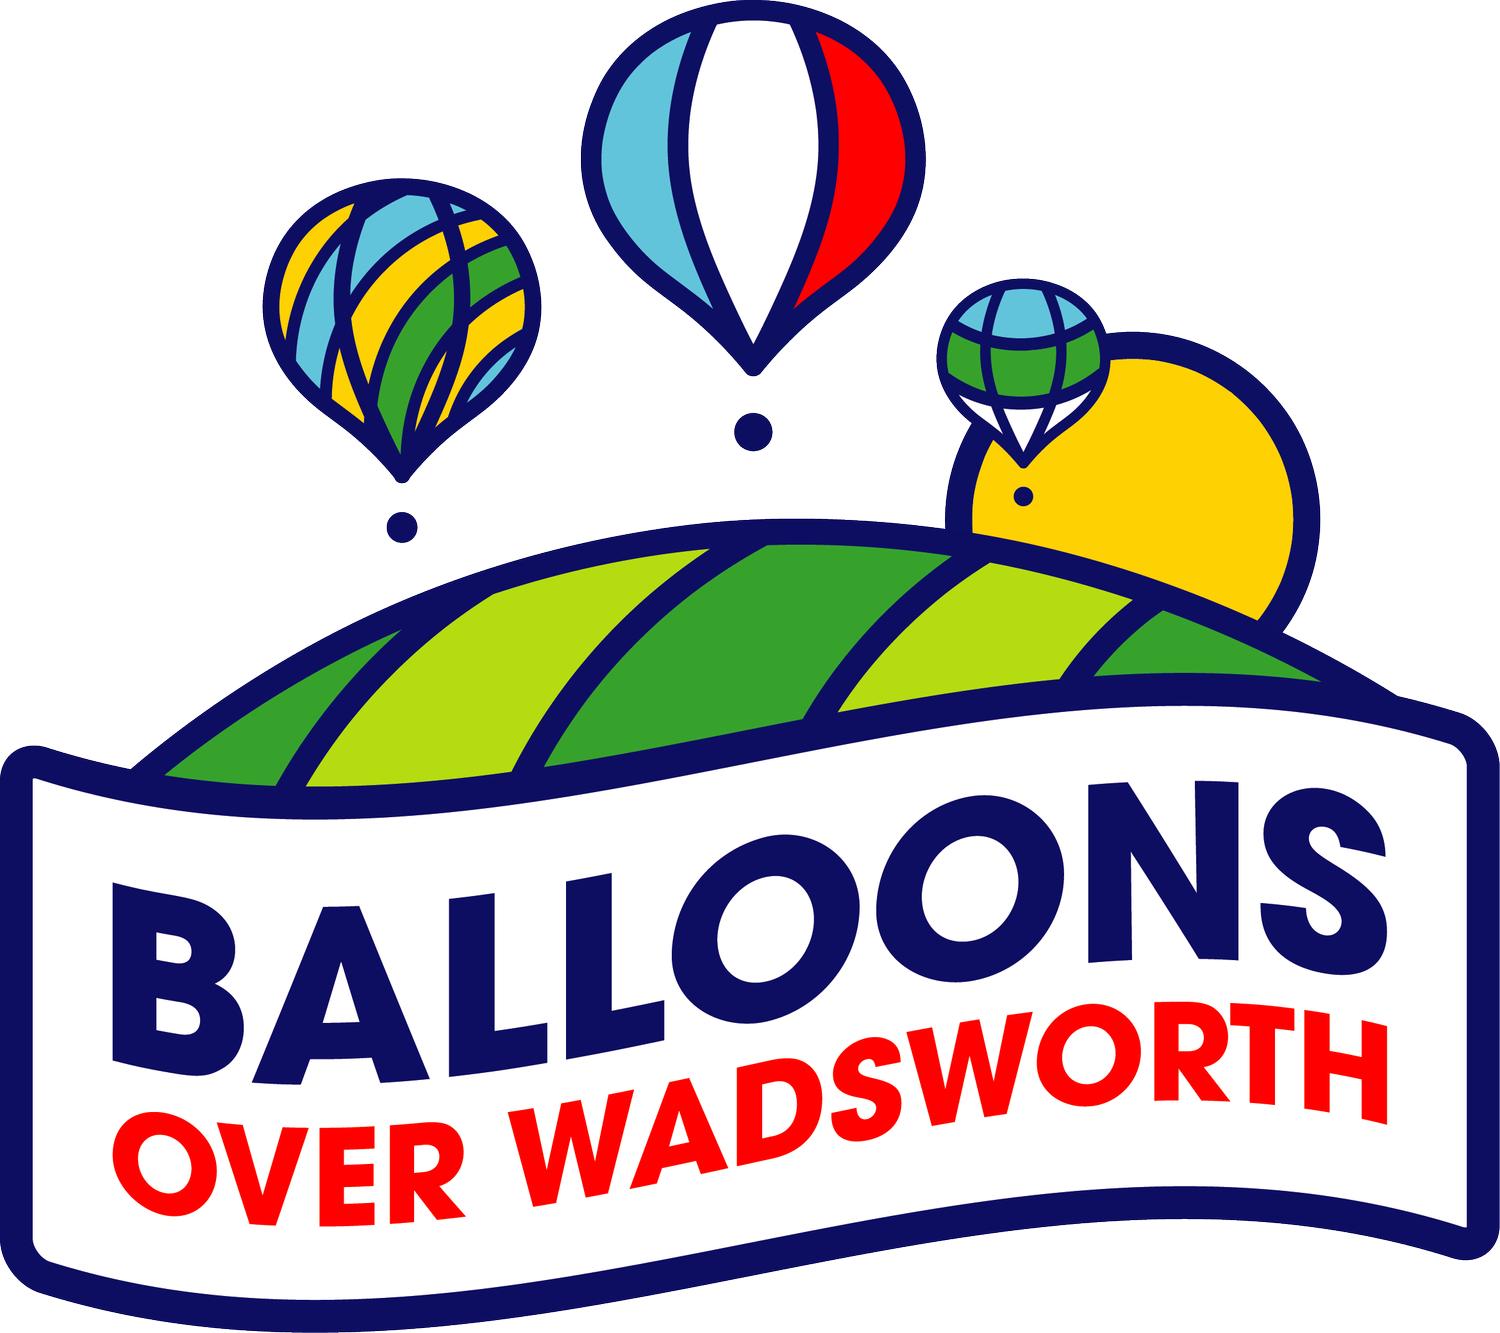 Balloons Over Wadsworth